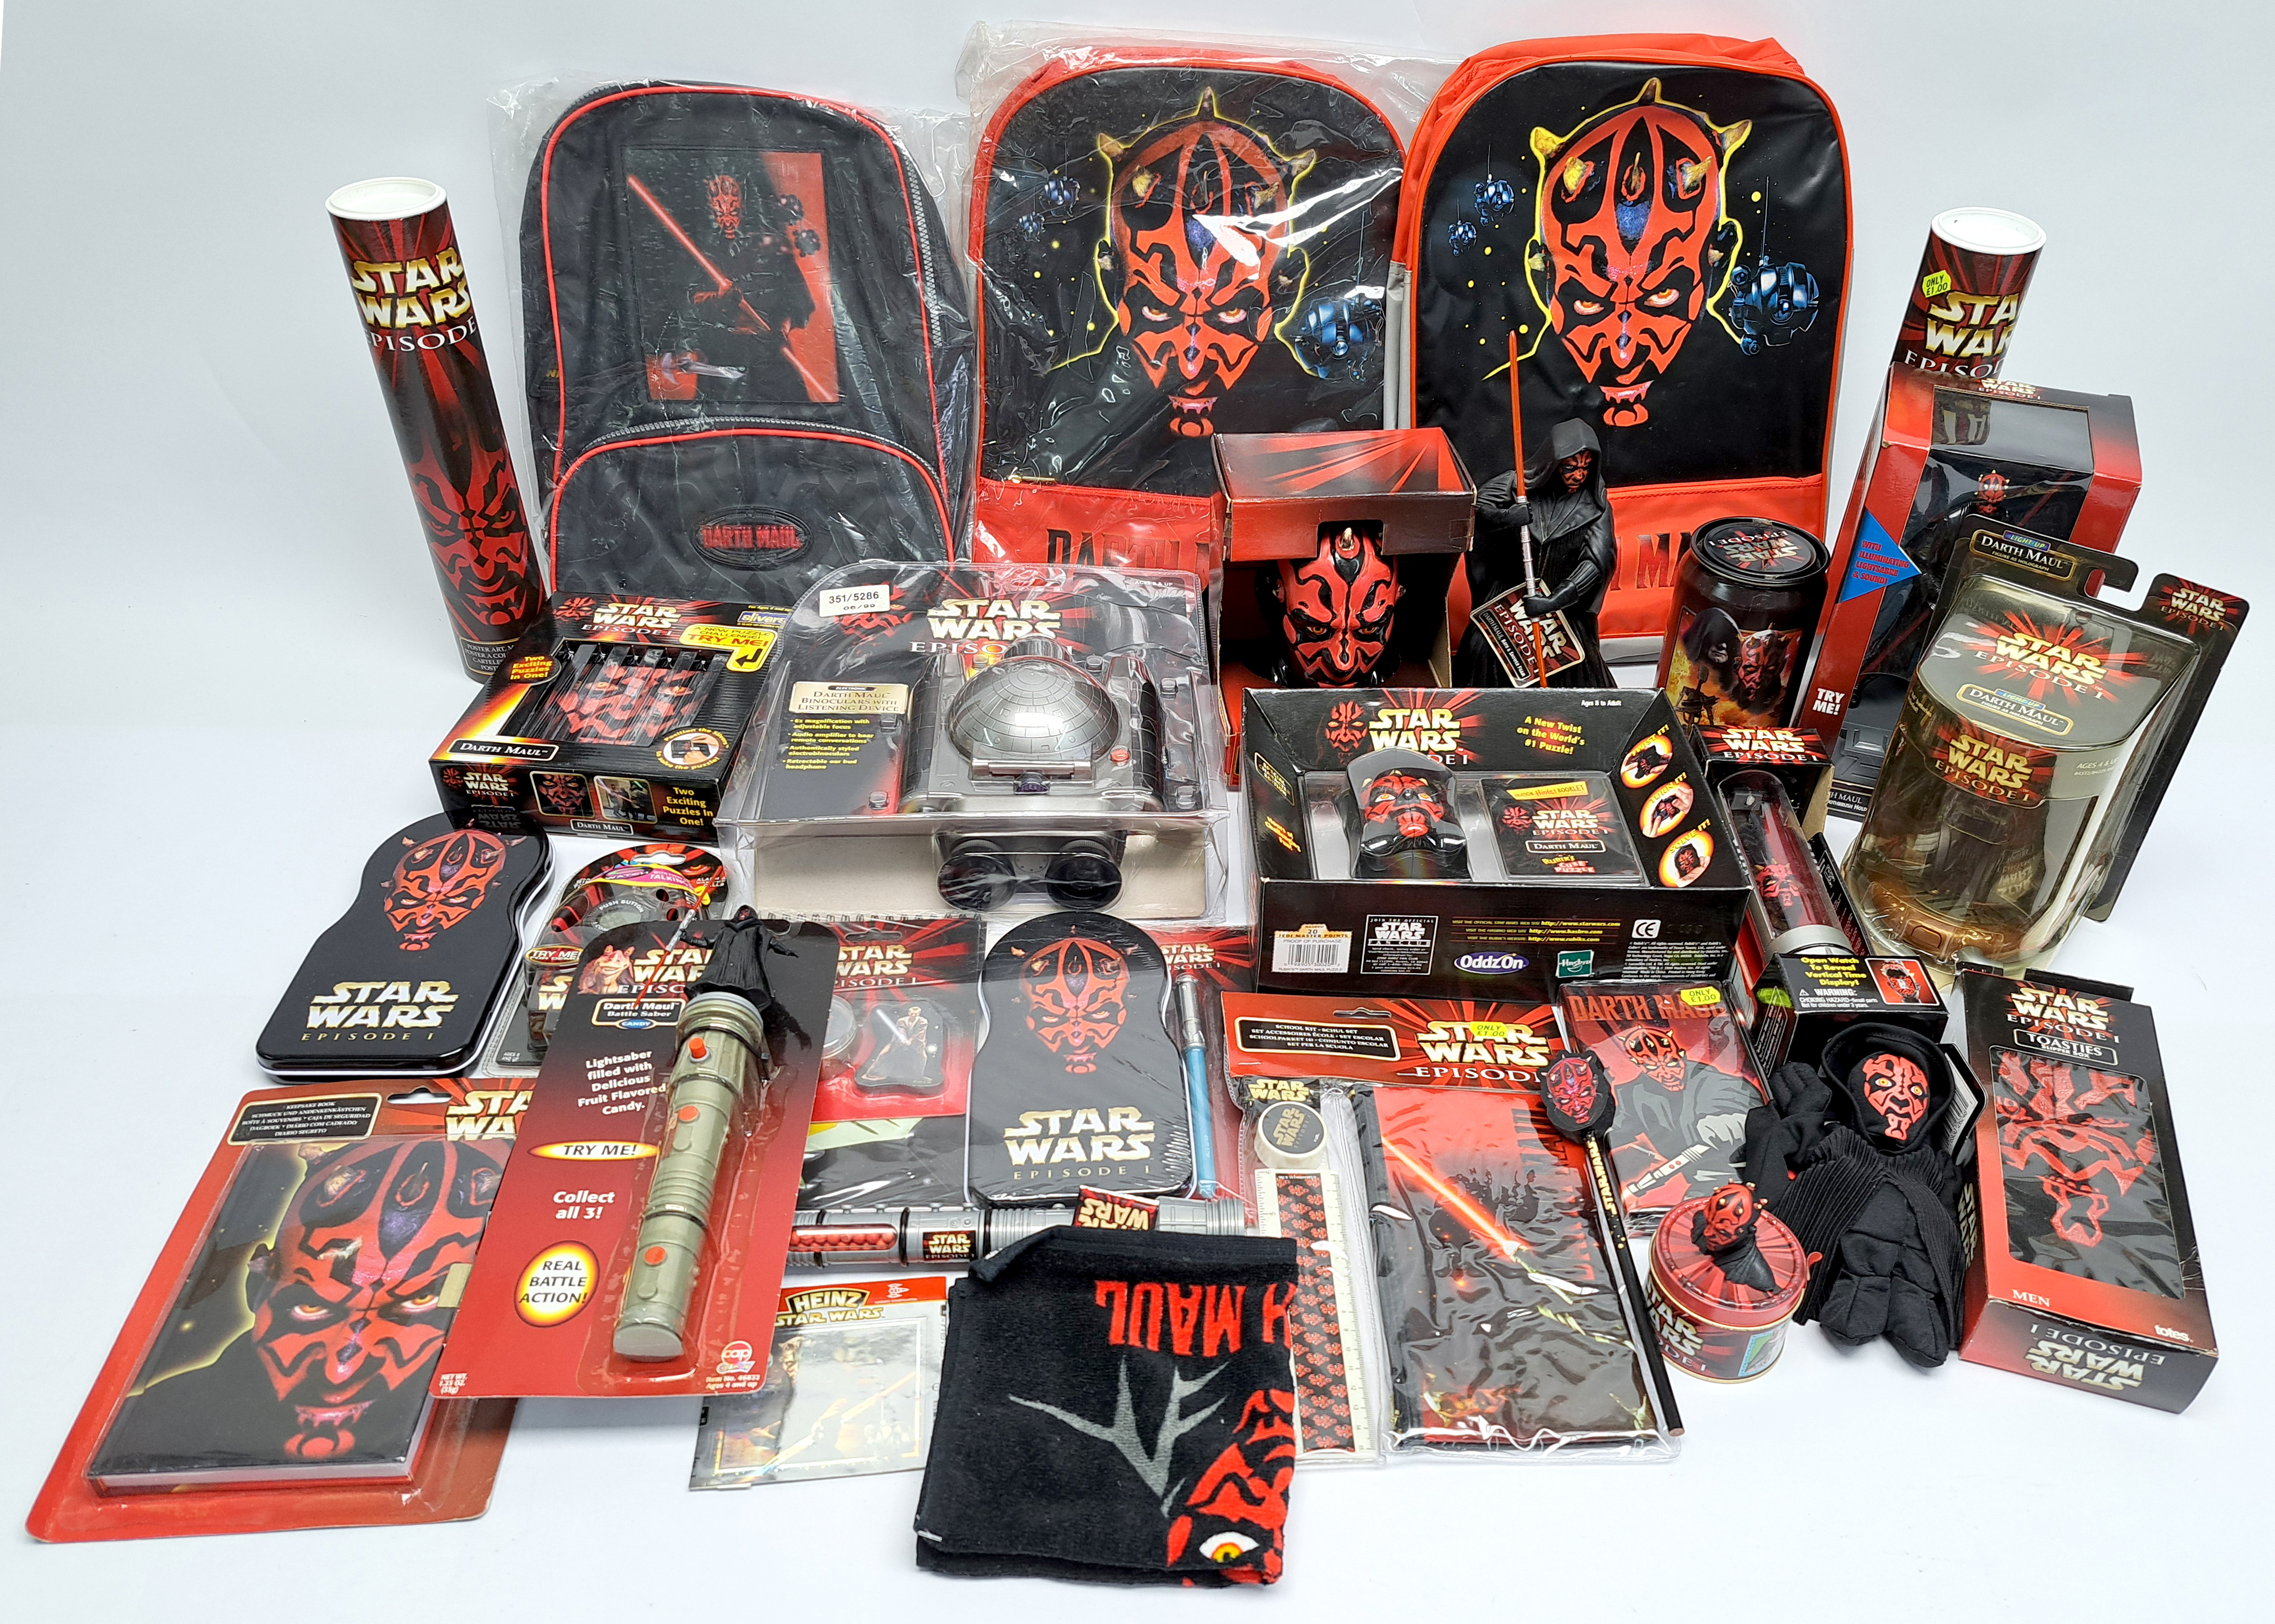 Hasbro, Tiger electronics, Applause Star Wars Darth Maul mixed lot Excellent to near mint